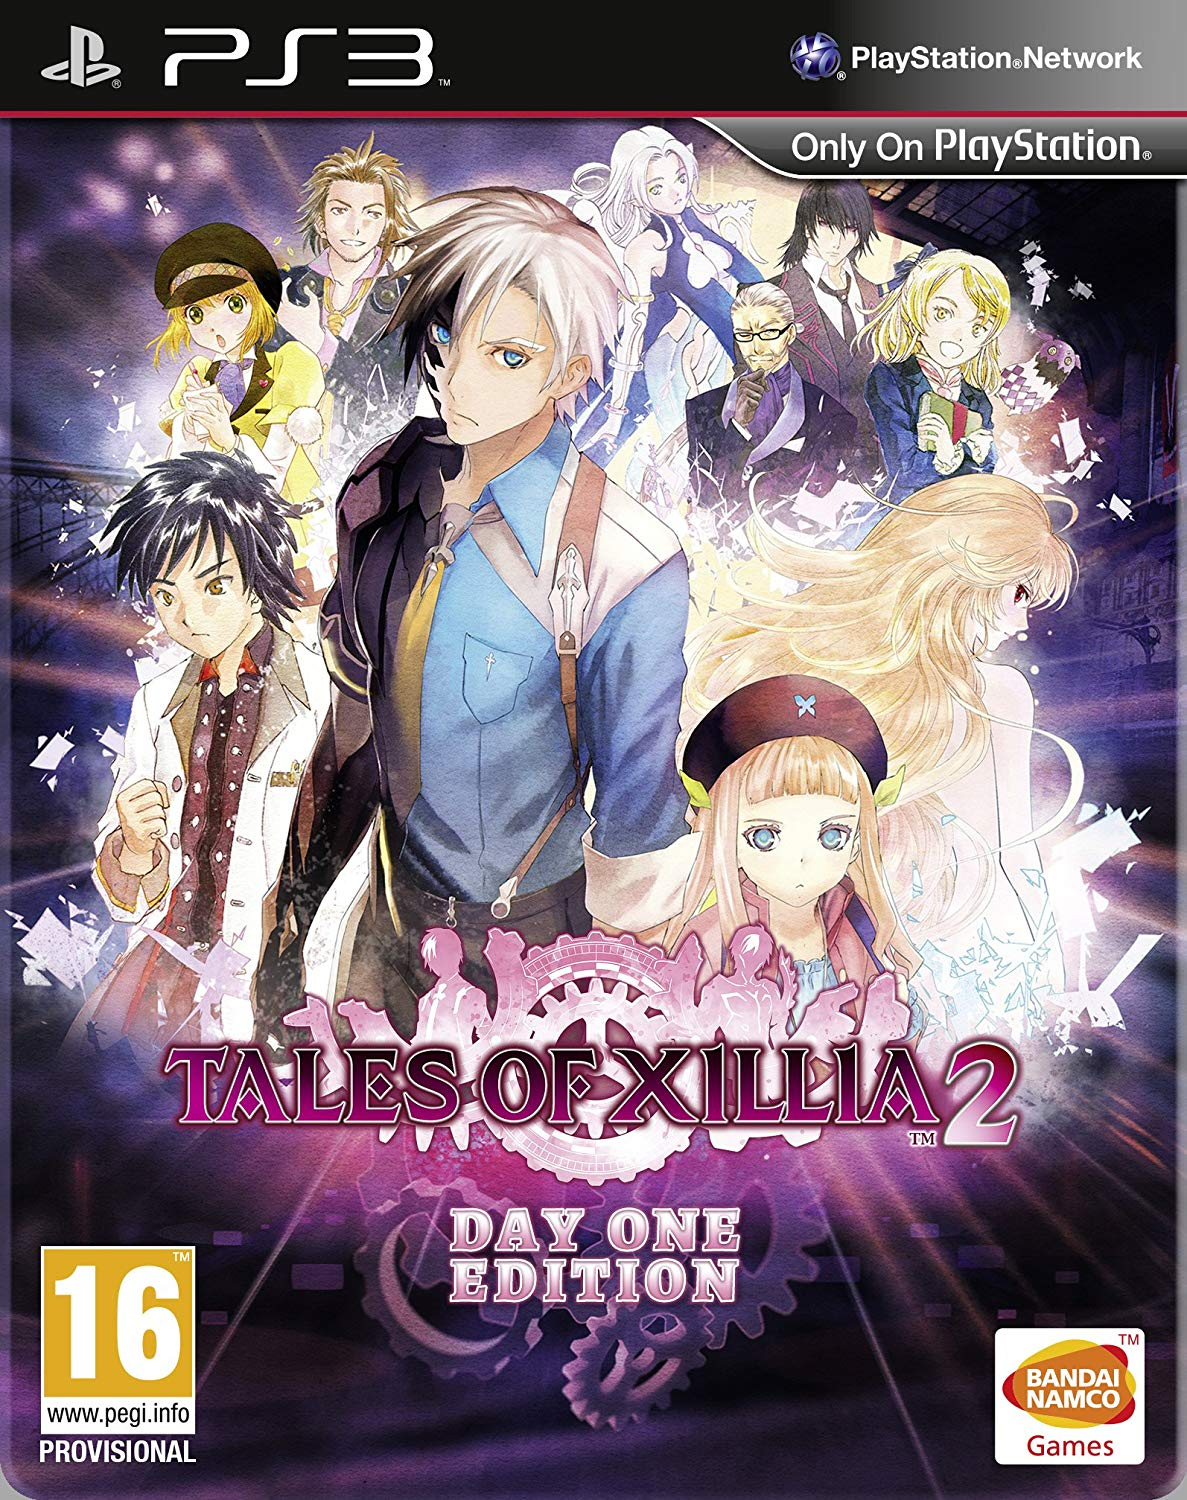 Tales of Xillia 2 Cover - Europe
Keywords: tales of xillia 2 cover europe